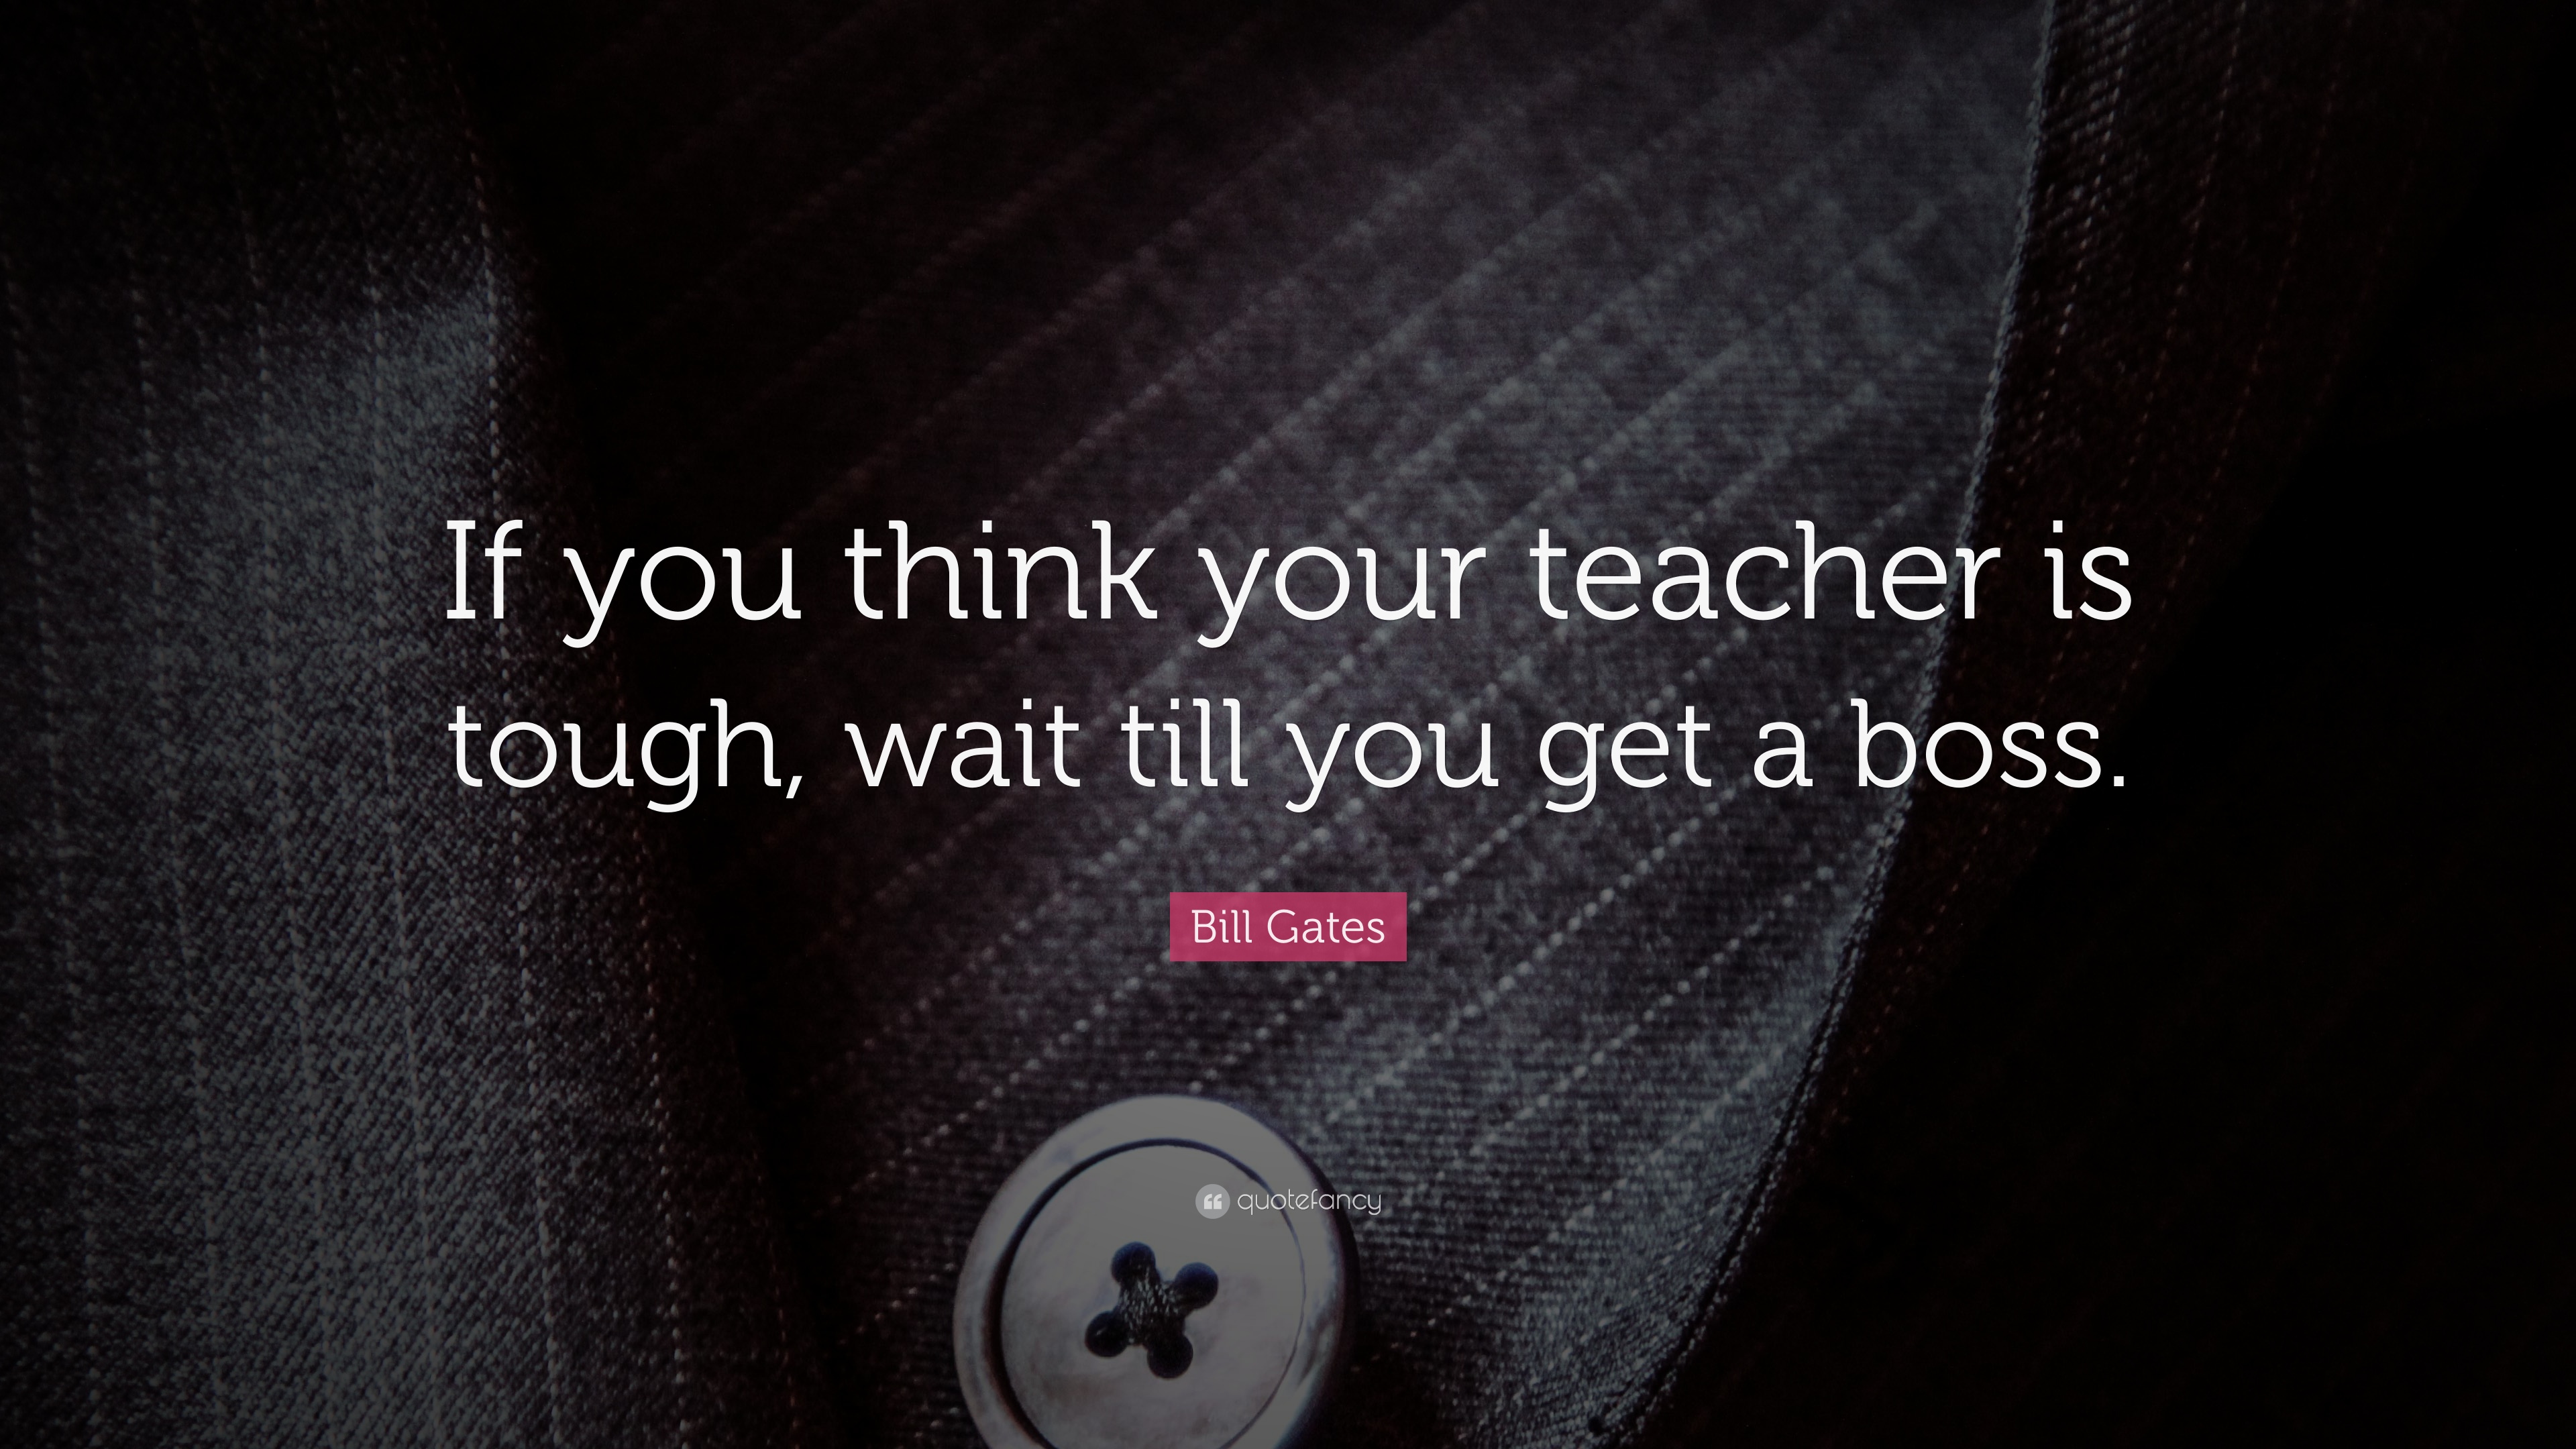 Bill Gates Quote: “If you think your teacher is tough, wait till you